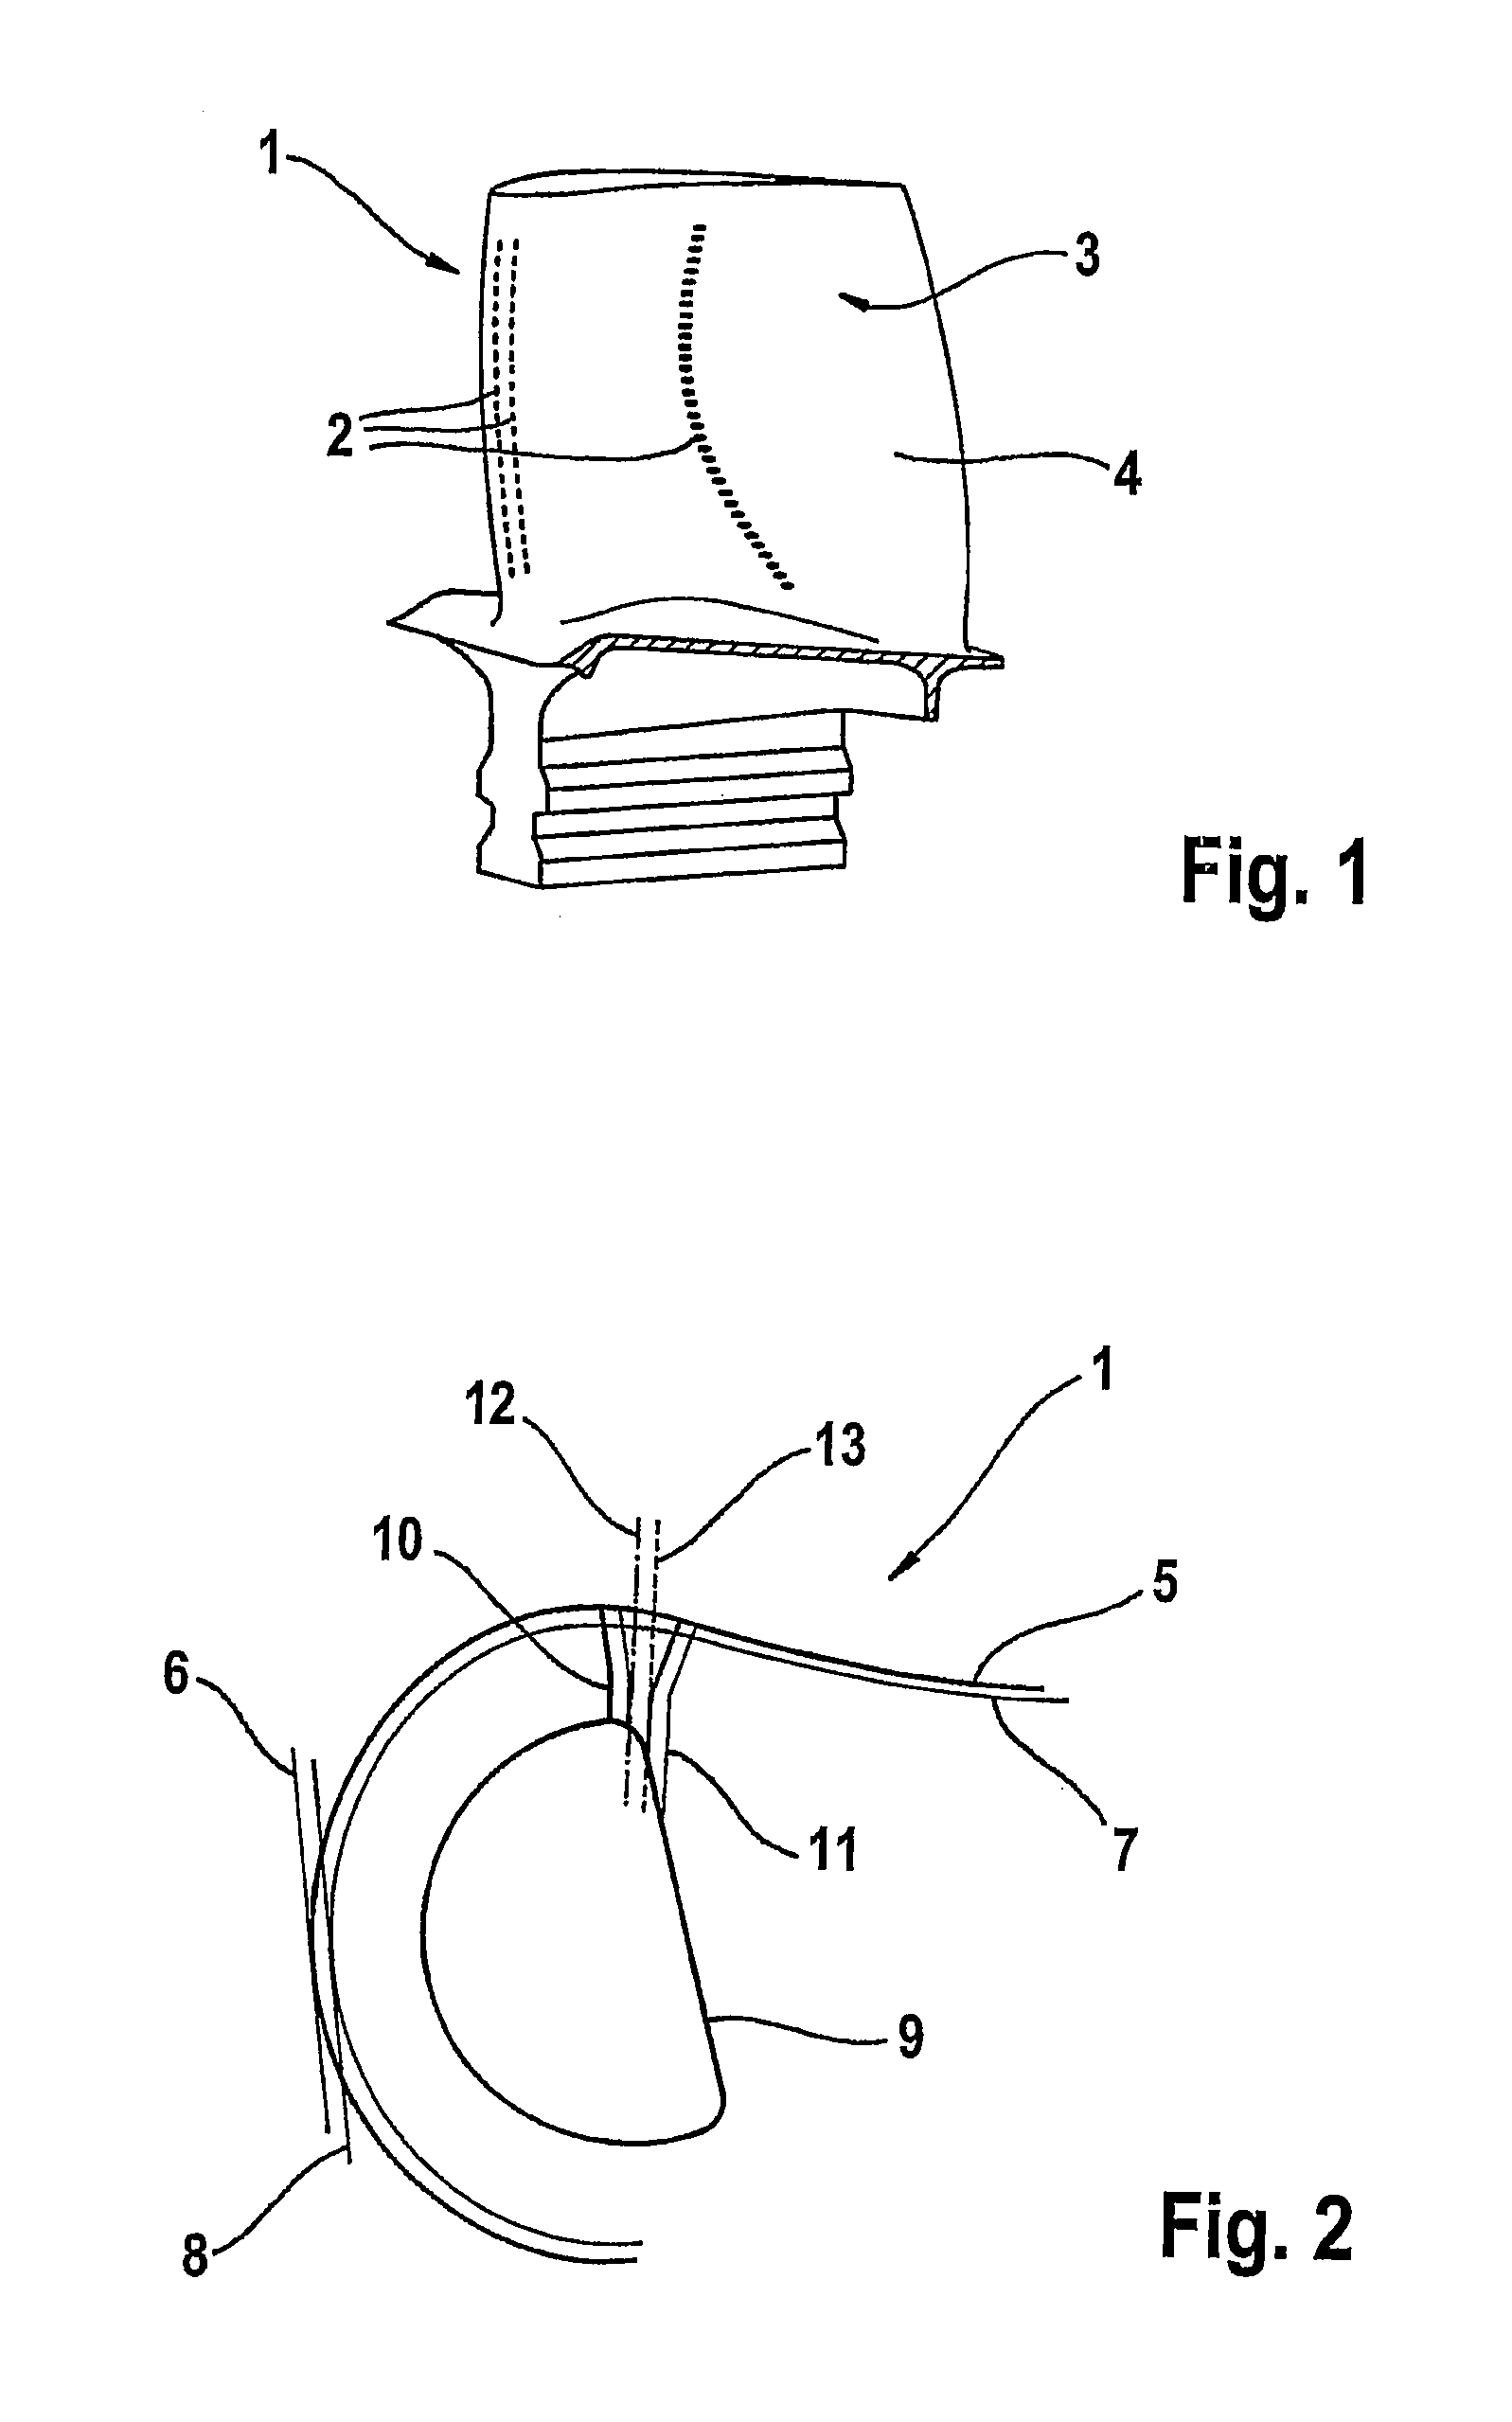 Process for producing holes